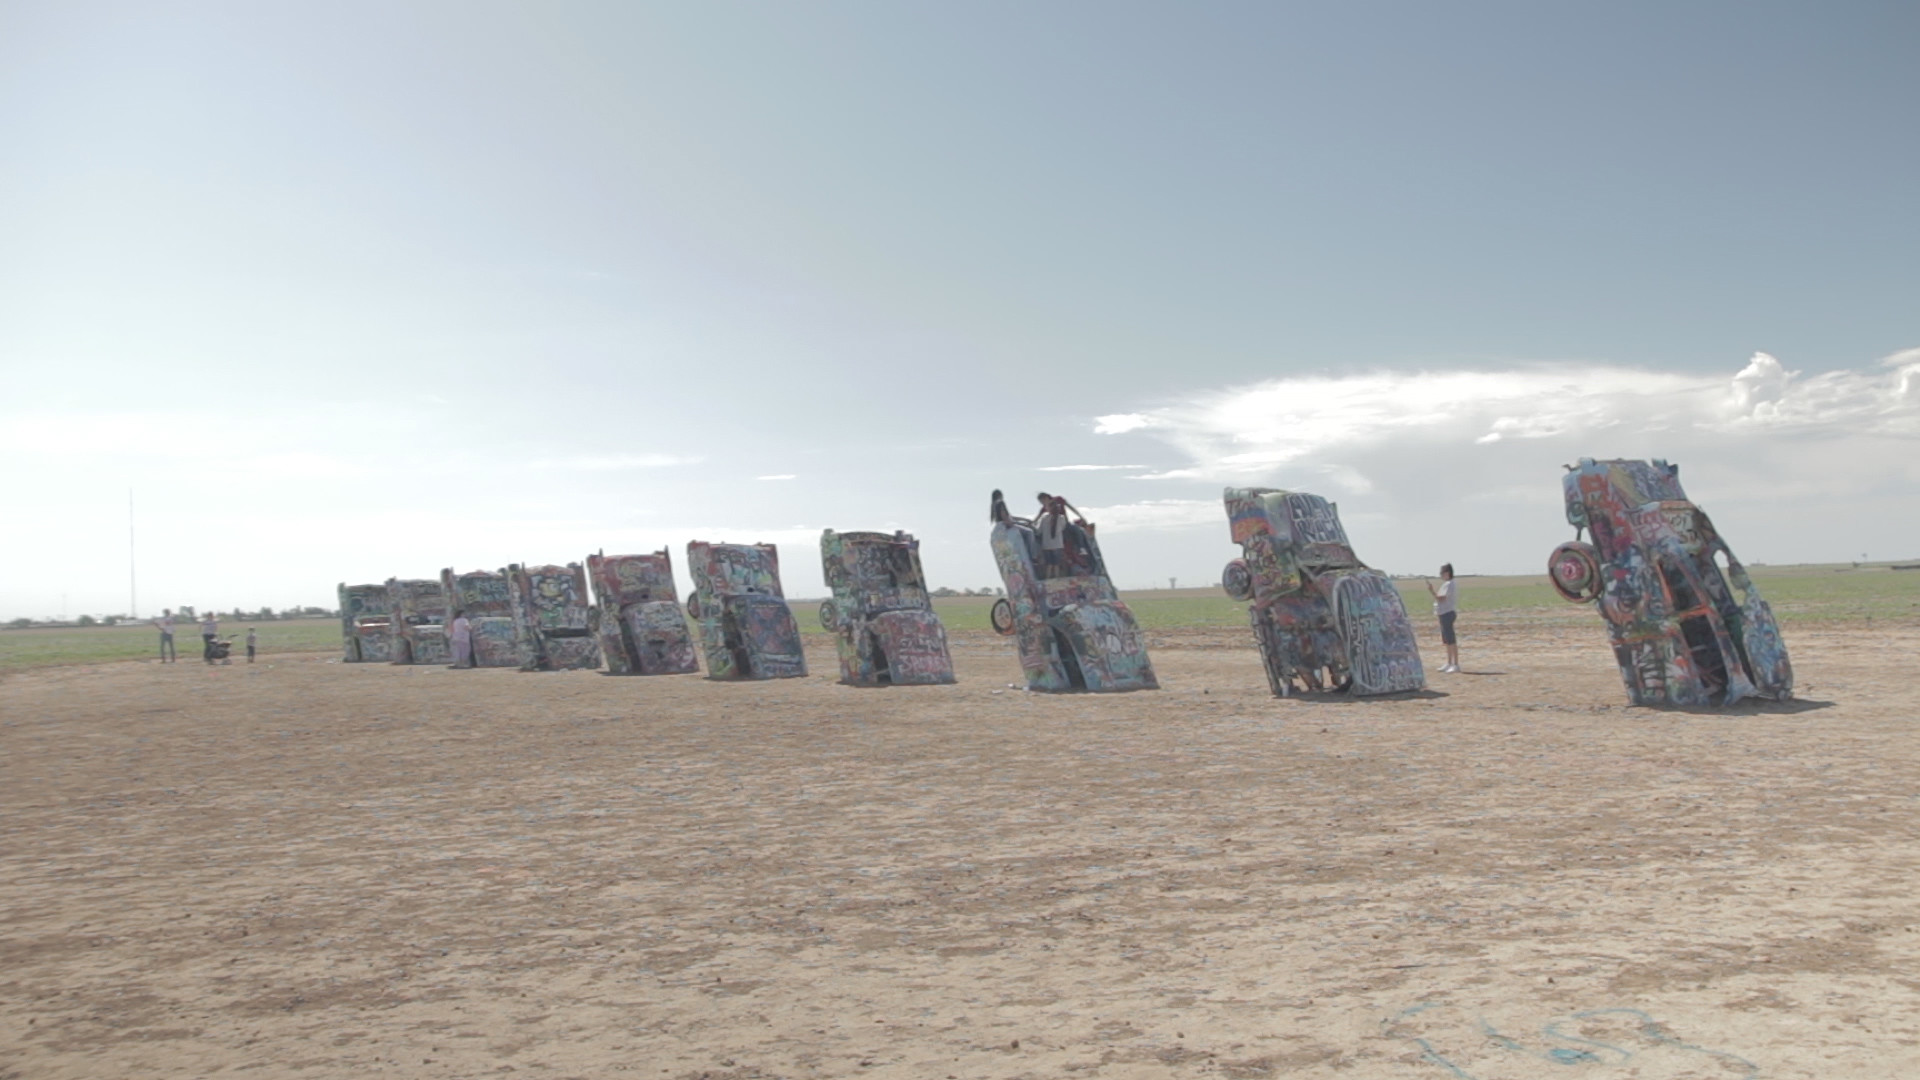 1920x1080 The upturned cars of Cadillac Ranch, TX